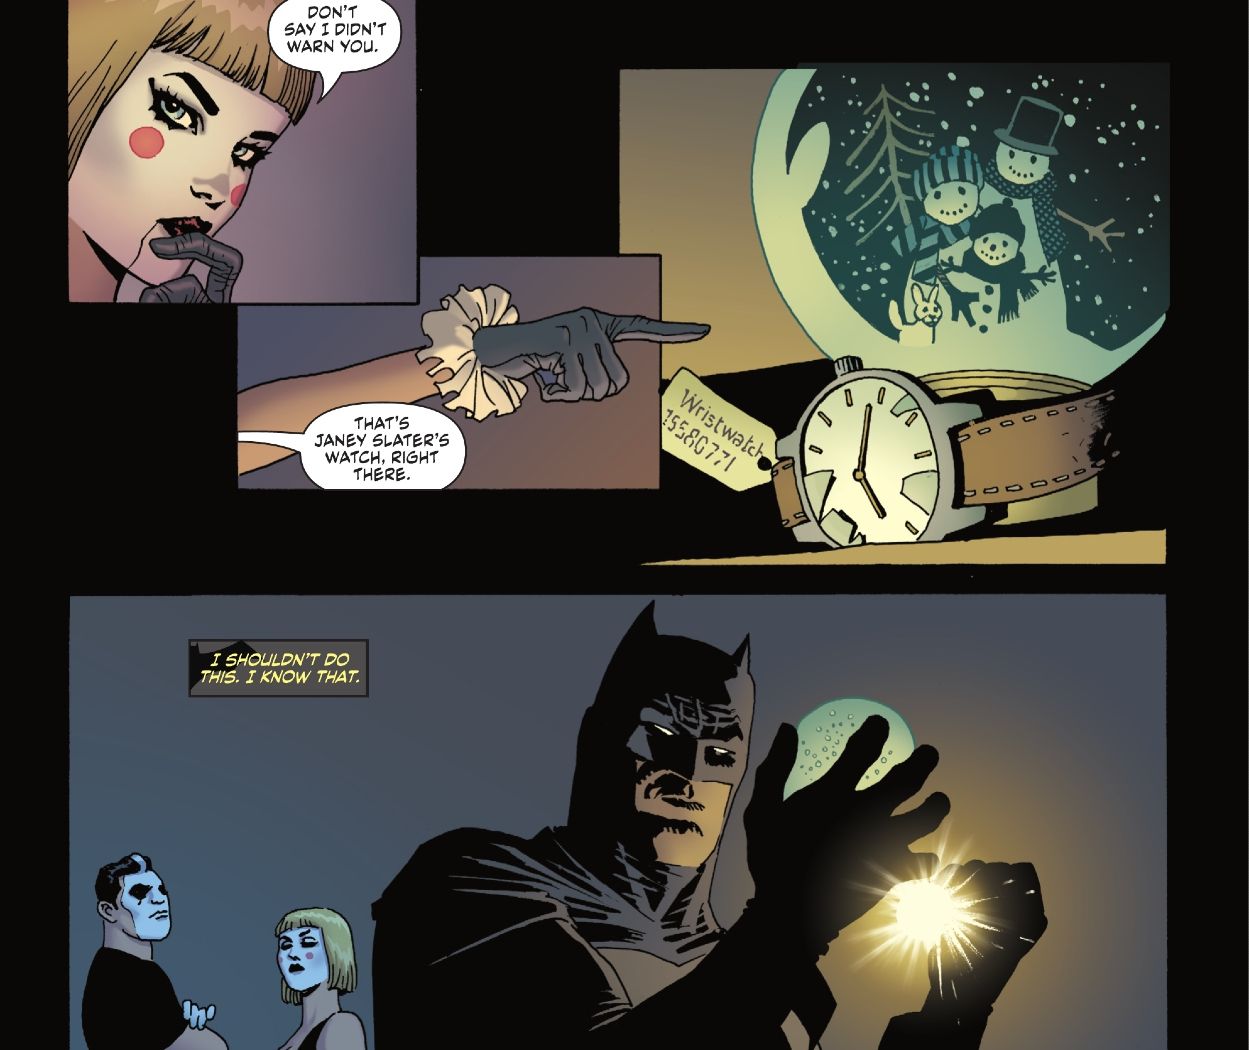 Batman retrieves Janey Slater's watch with the help of Mine and Marionette in Flashpoint Beyond #0 